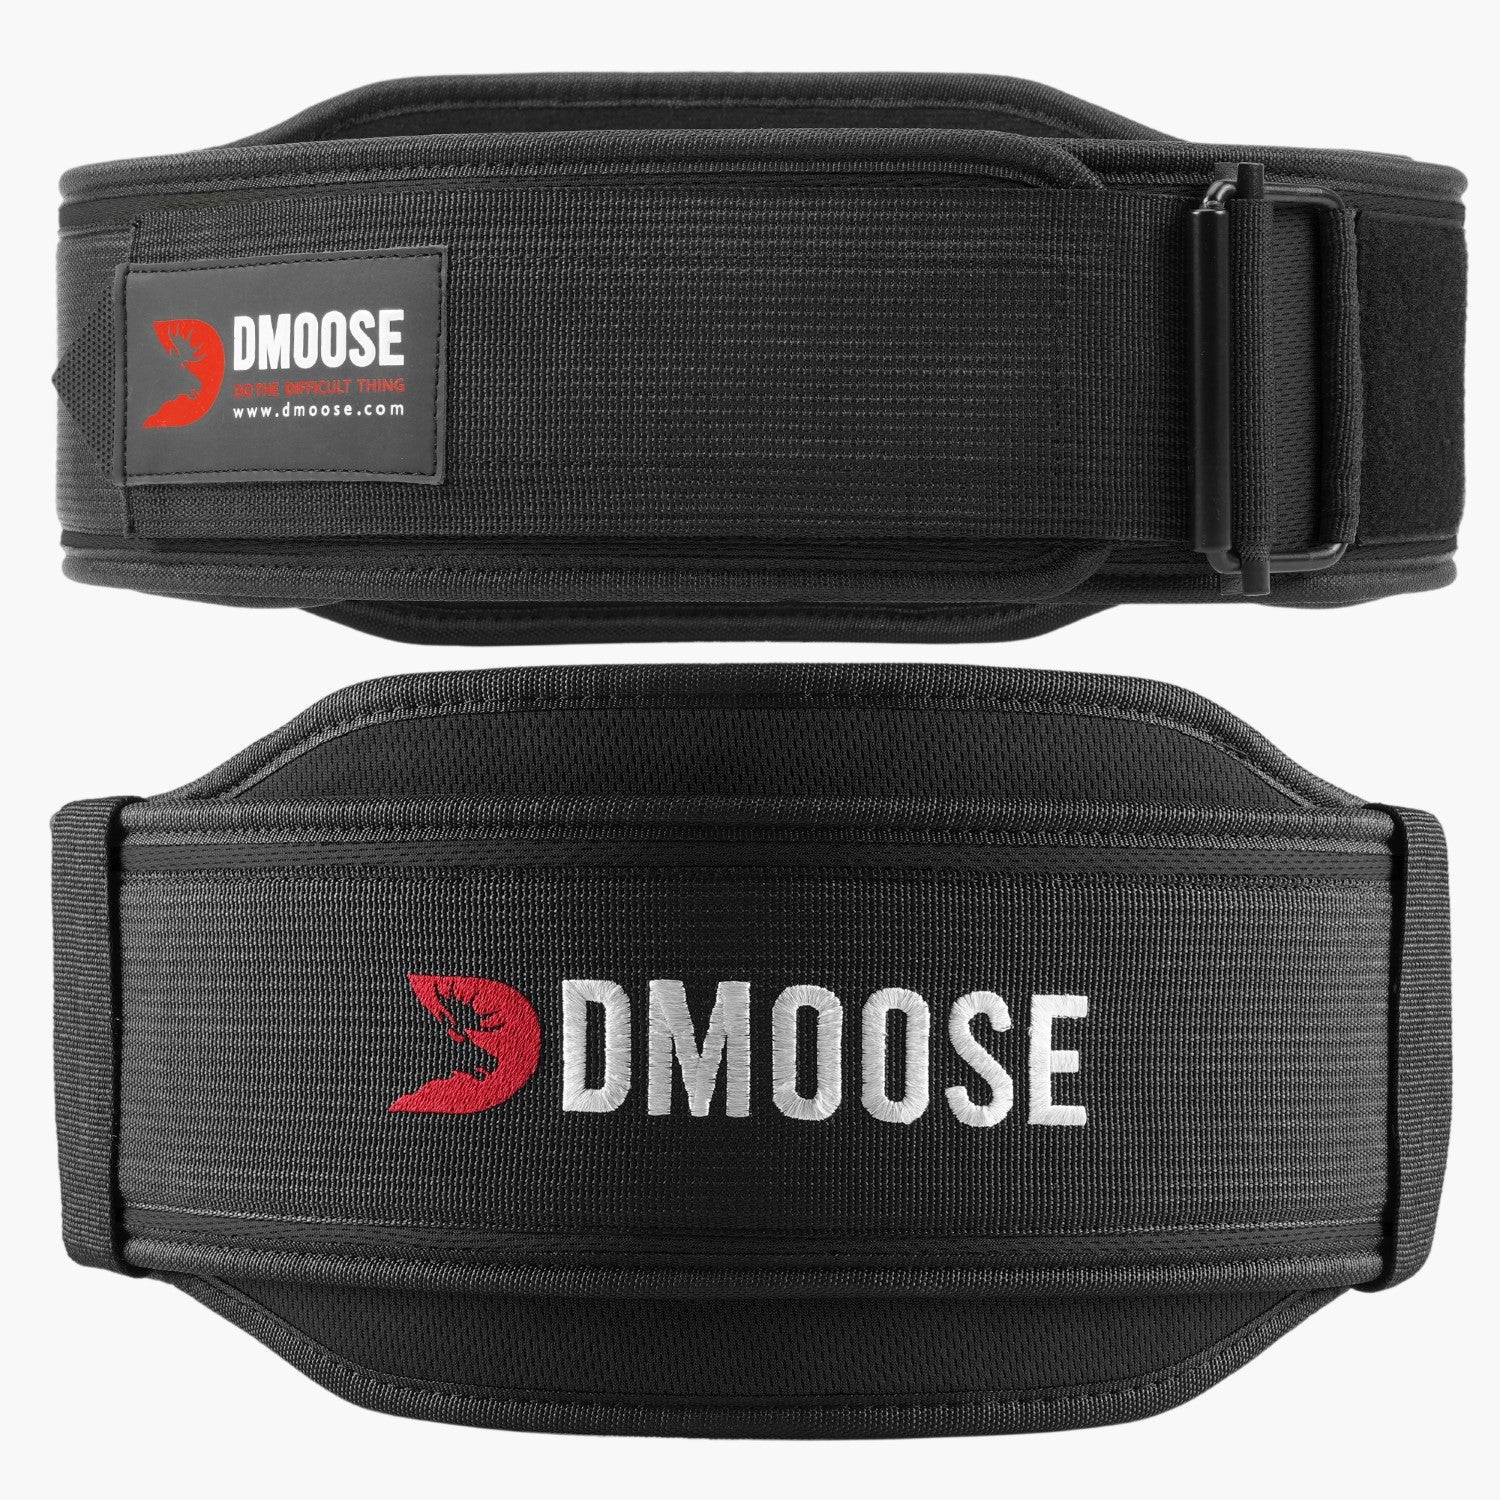 DMoose Lifting Gear  Lift Weights Without Risking Injuries!